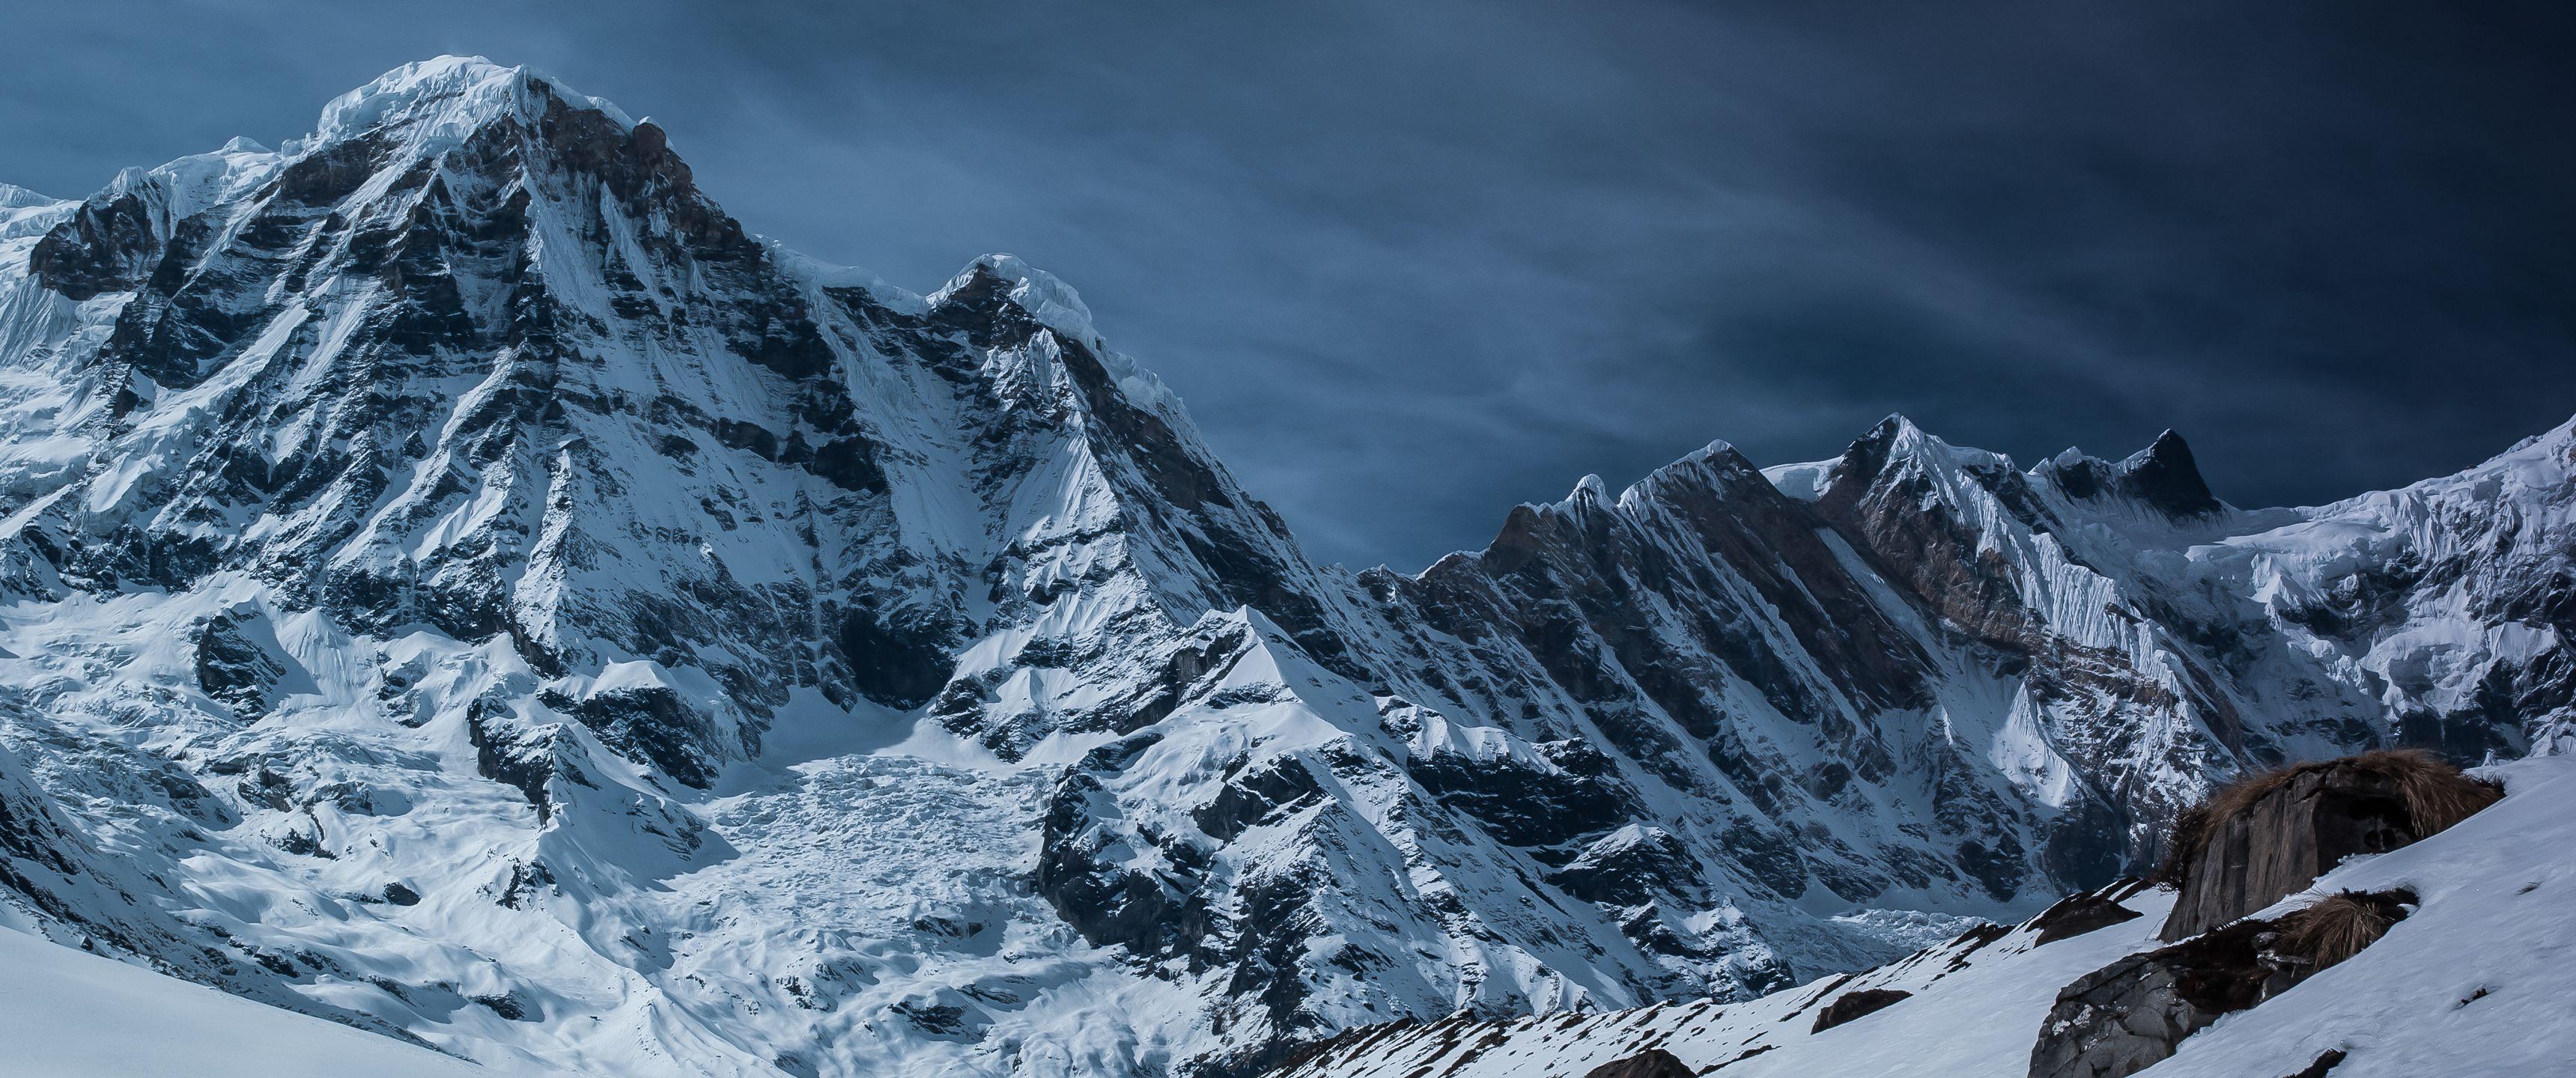 Snow Covered Mountains:9 Ultrawide HD Wallpaper